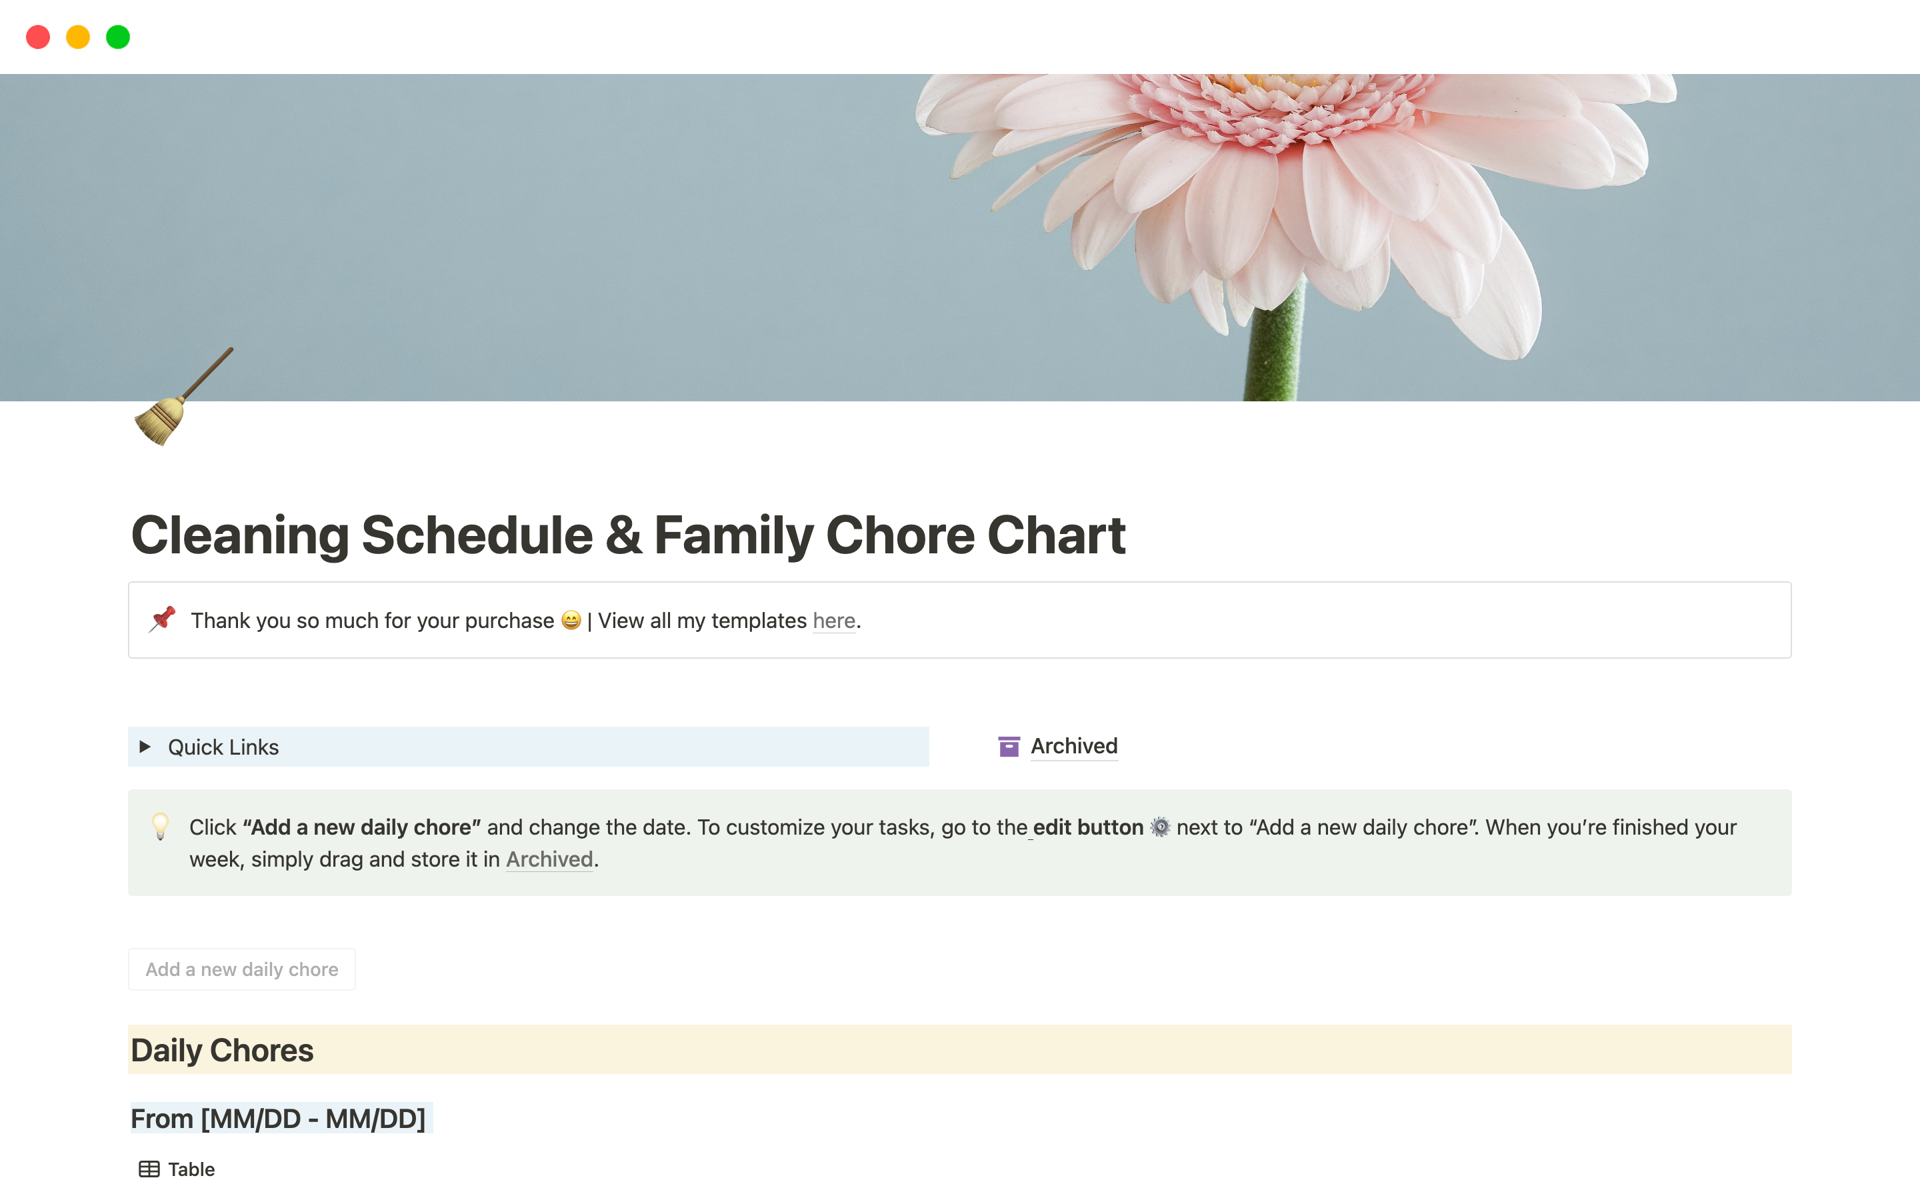 Stay organized and maintain a healthy lifestyle with our Cleaning Schedule & Family Chore Chart.